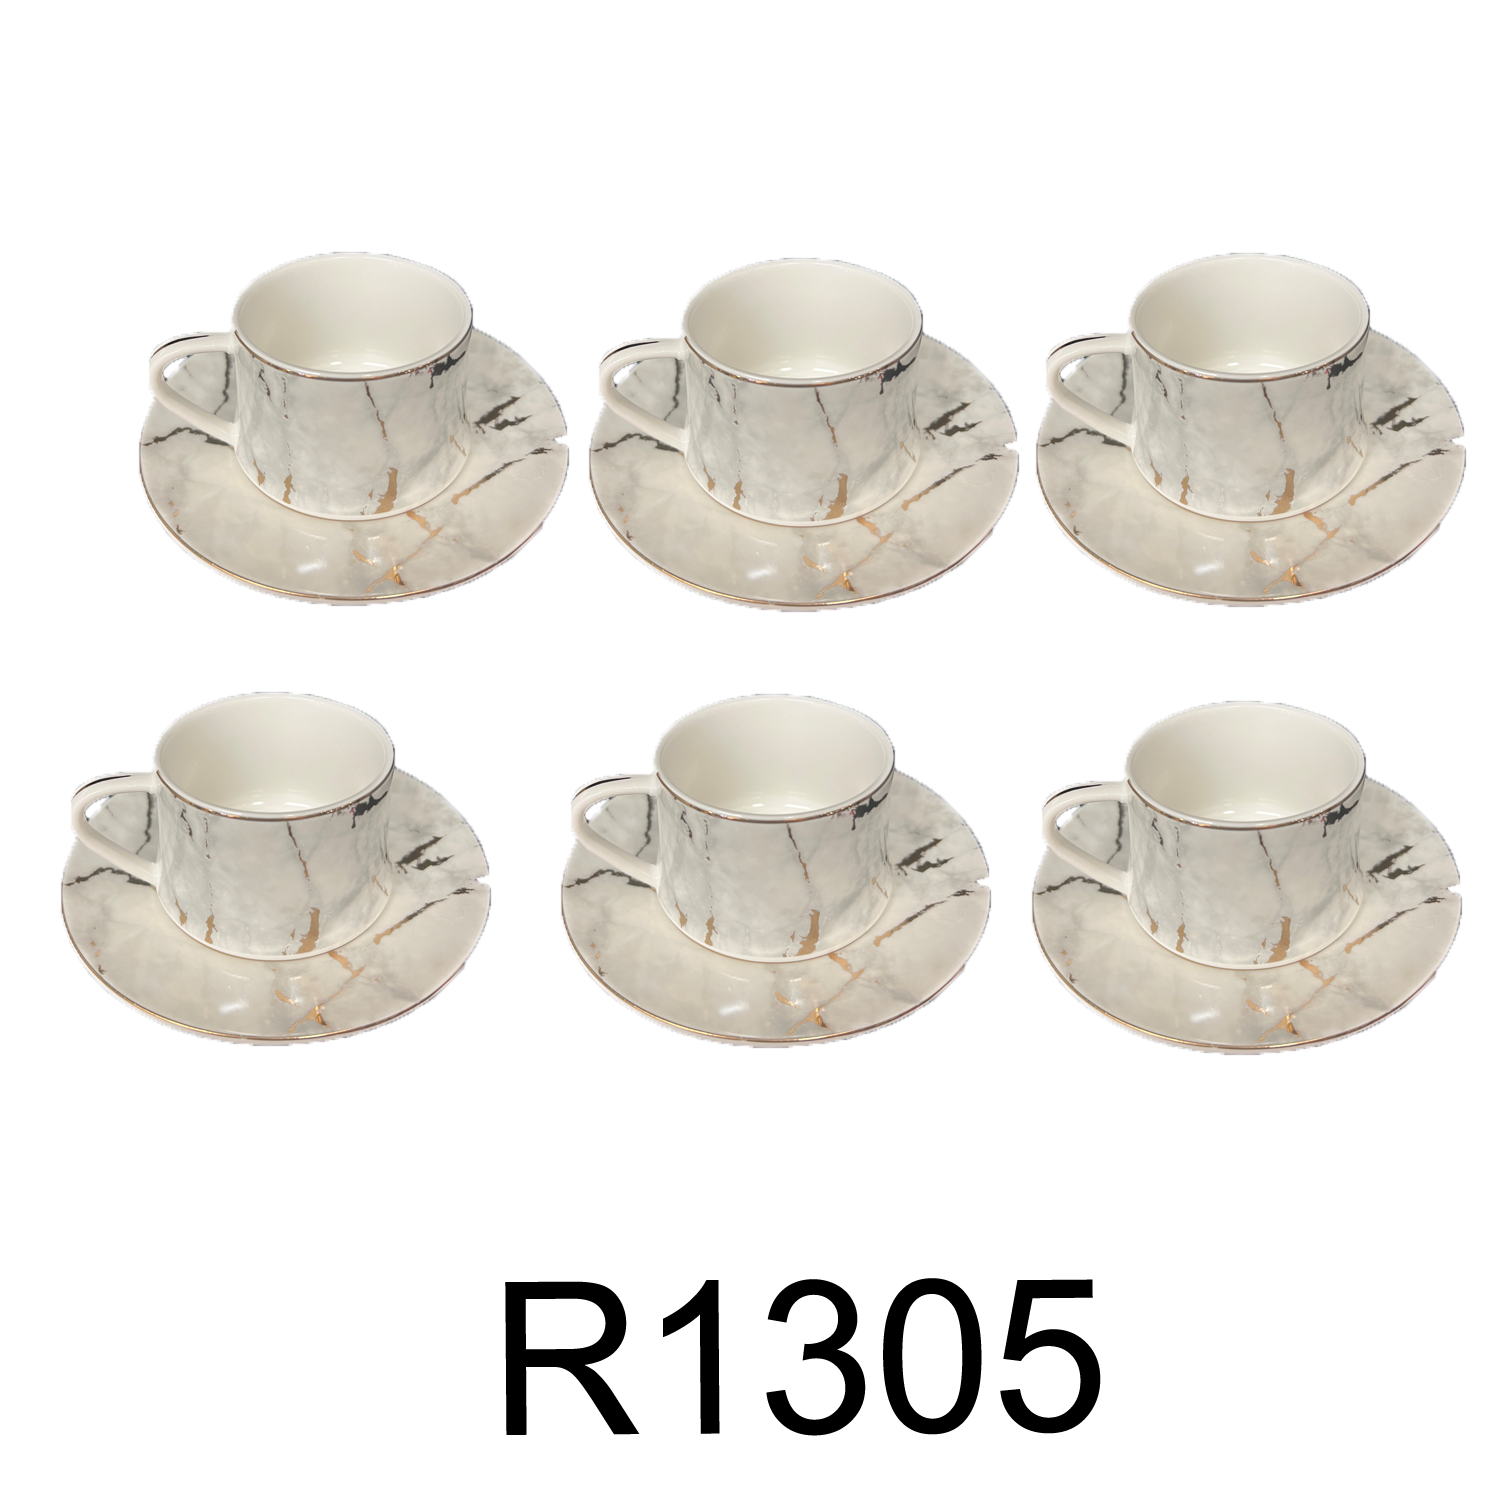 200ml Luxury Marble Ceramic Coffee Cups And Saucers Set With Gold Stan –  Yahan Sab Behtar Hai!